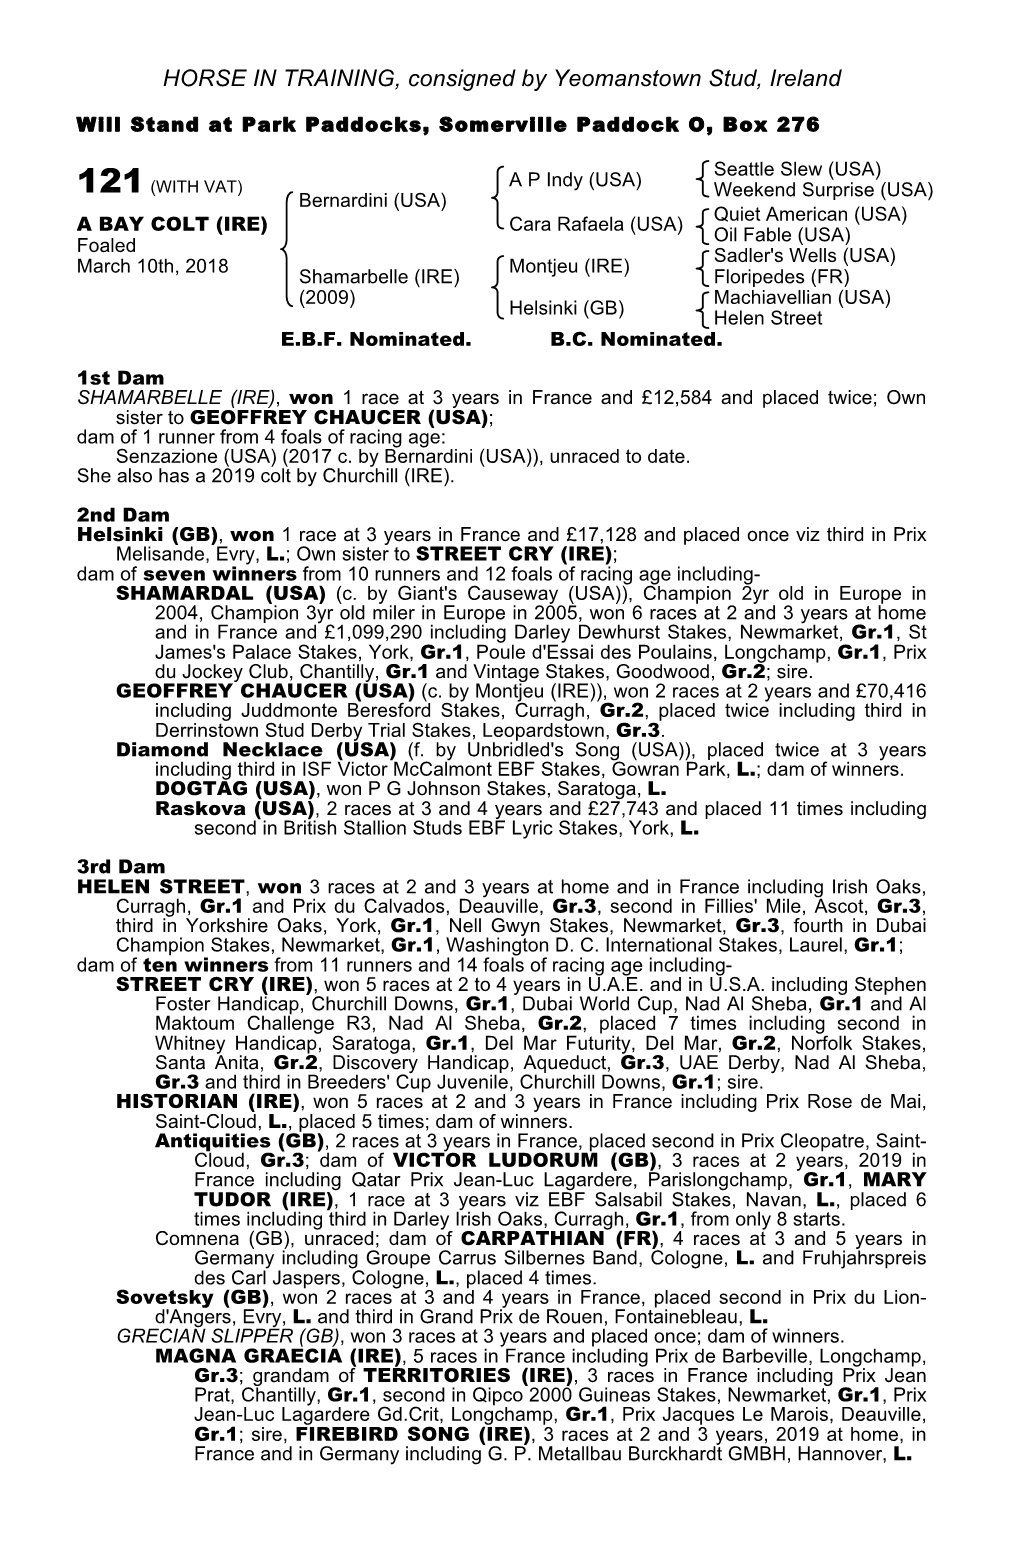 HORSE in TRAINING, Consigned by Yeomanstown Stud, Ireland